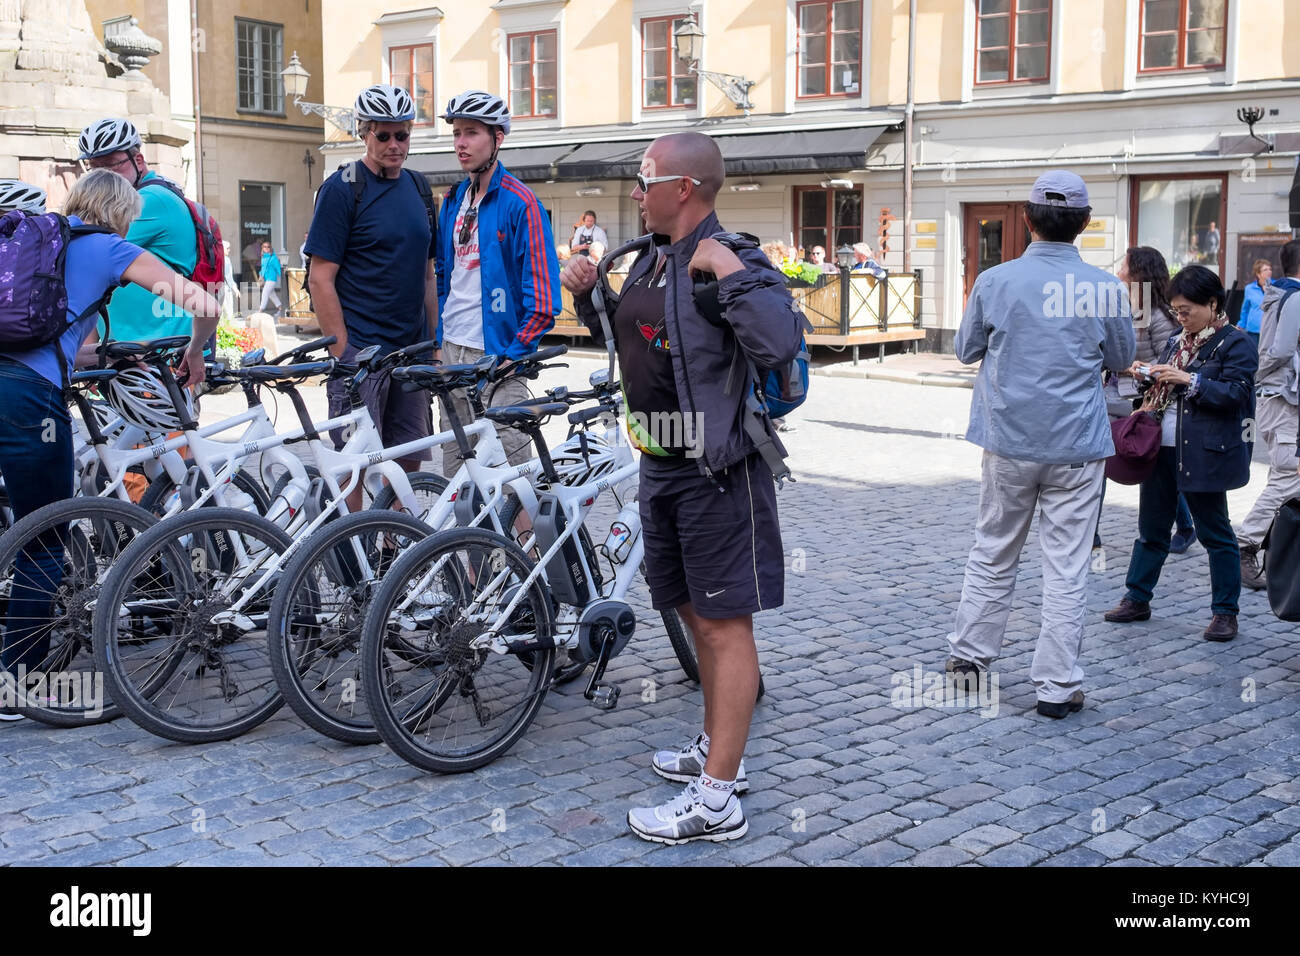 Stockholm Sweden bike tour group meets in a public square in Gamla Stan, the historic old town quarter in Stockholm. Bicycles are lined up Stock Photo